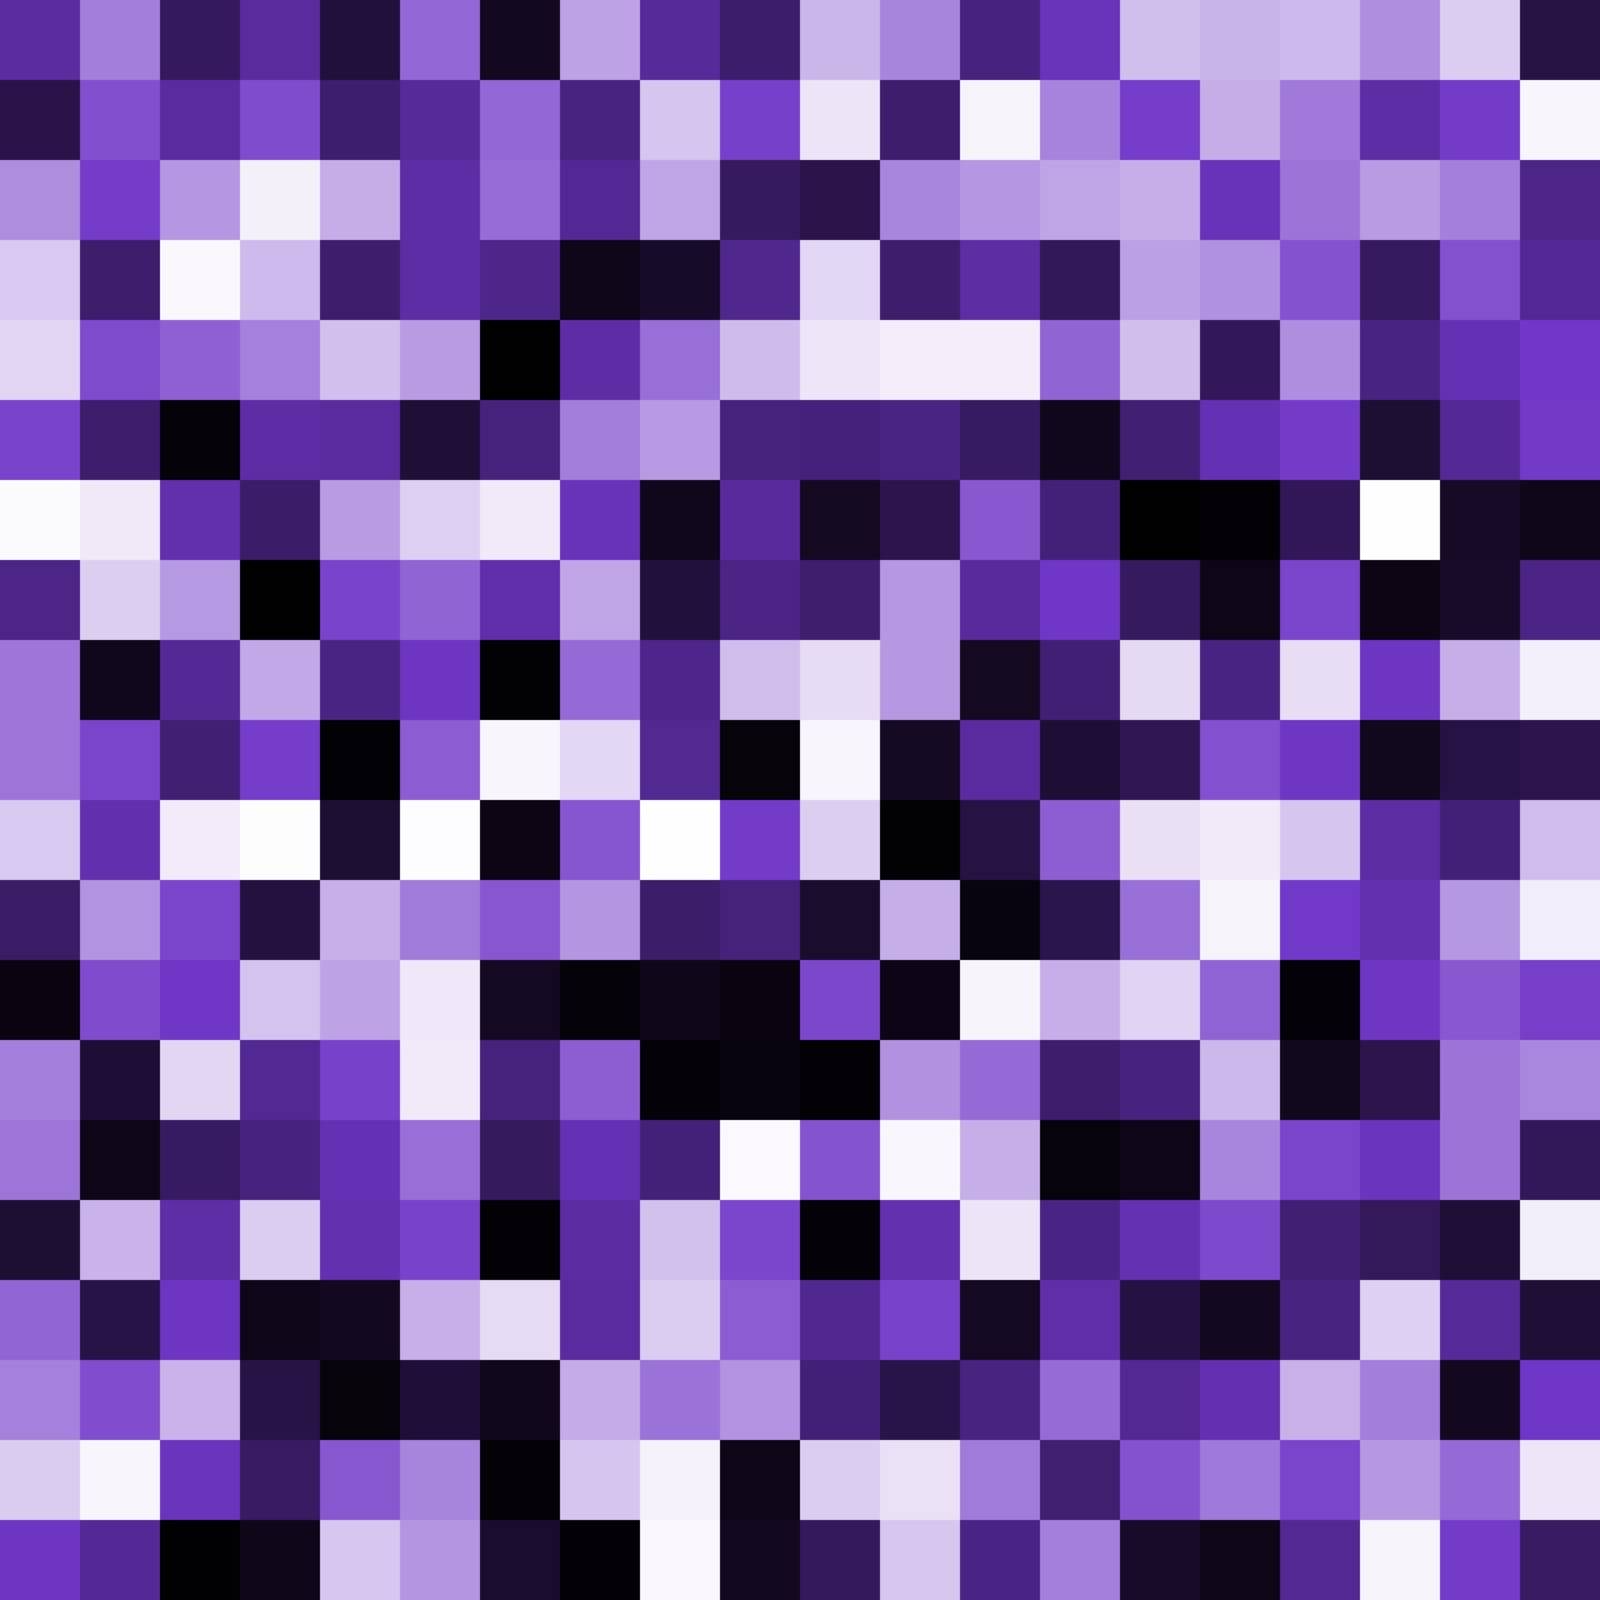 Abstract violet pixel background mosaic made of small squares. Seamless vector illustration.